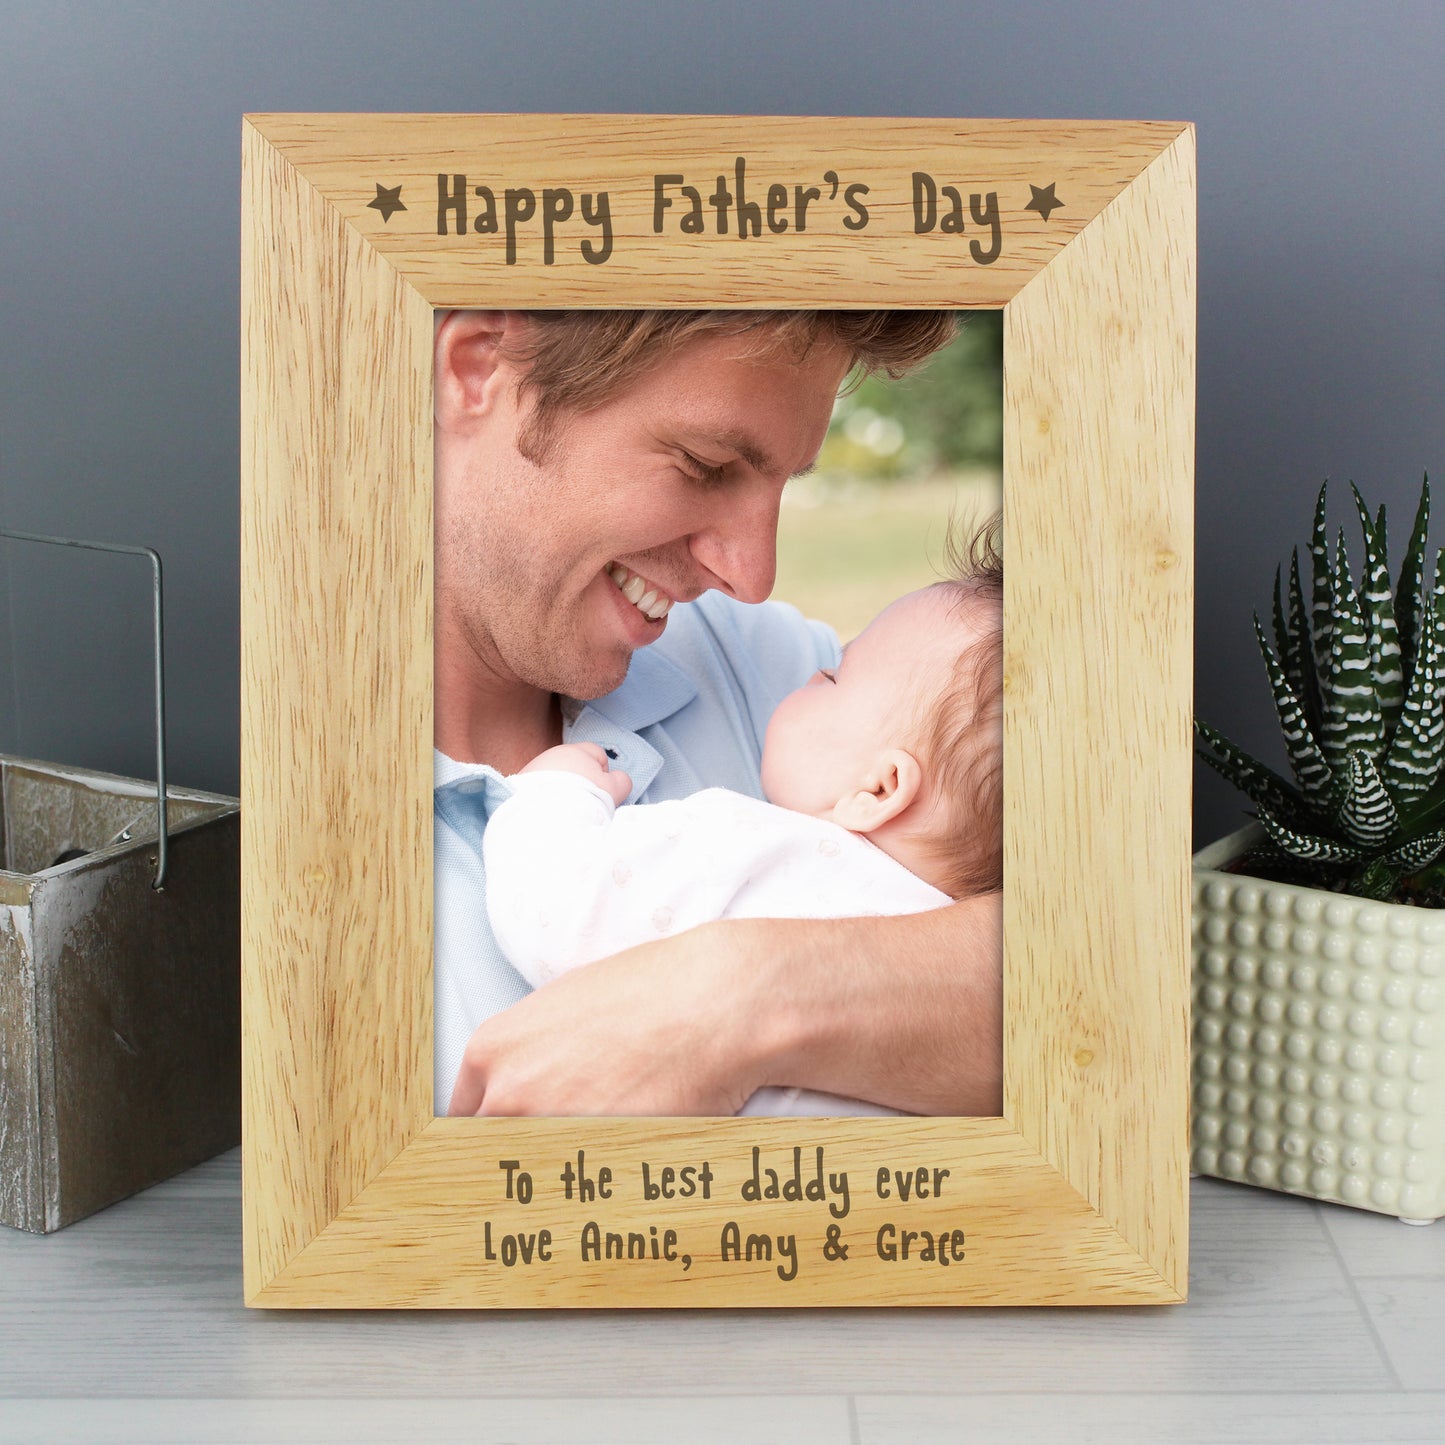 Personalised Happy Father's Day 5x7 Wooden Photo Frame - Personalise It!